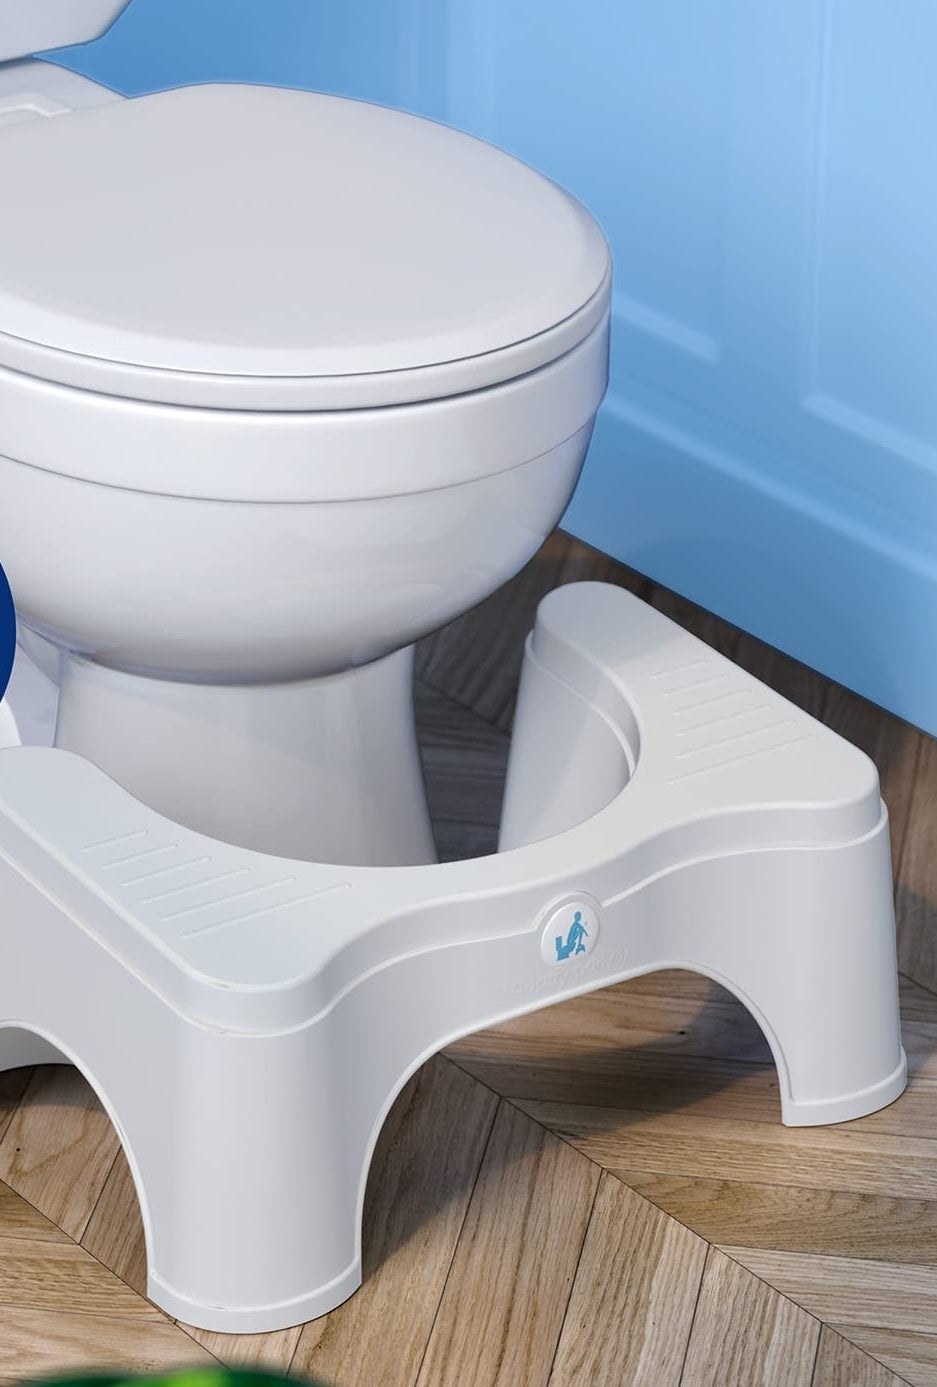 the squatty potty in front of a toilet in a bathroom